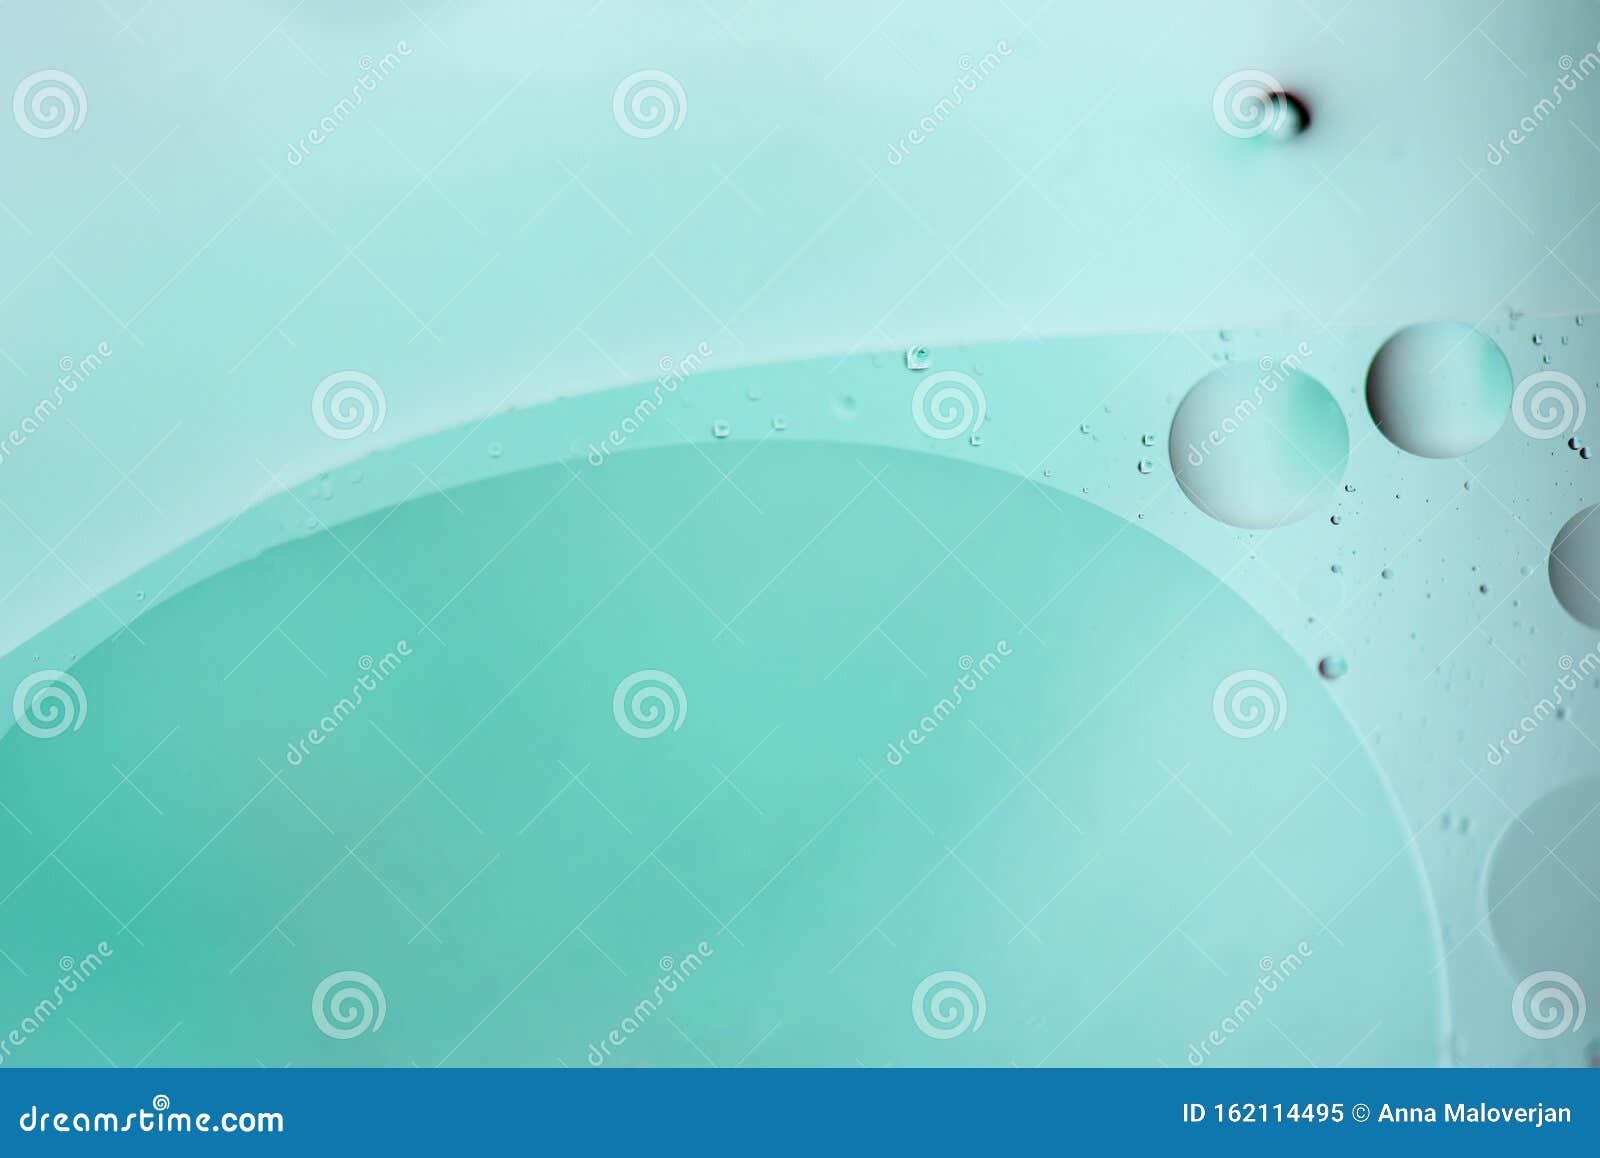 Light Blue Abstract Background Picture Made with Oil, Water and Soap ...